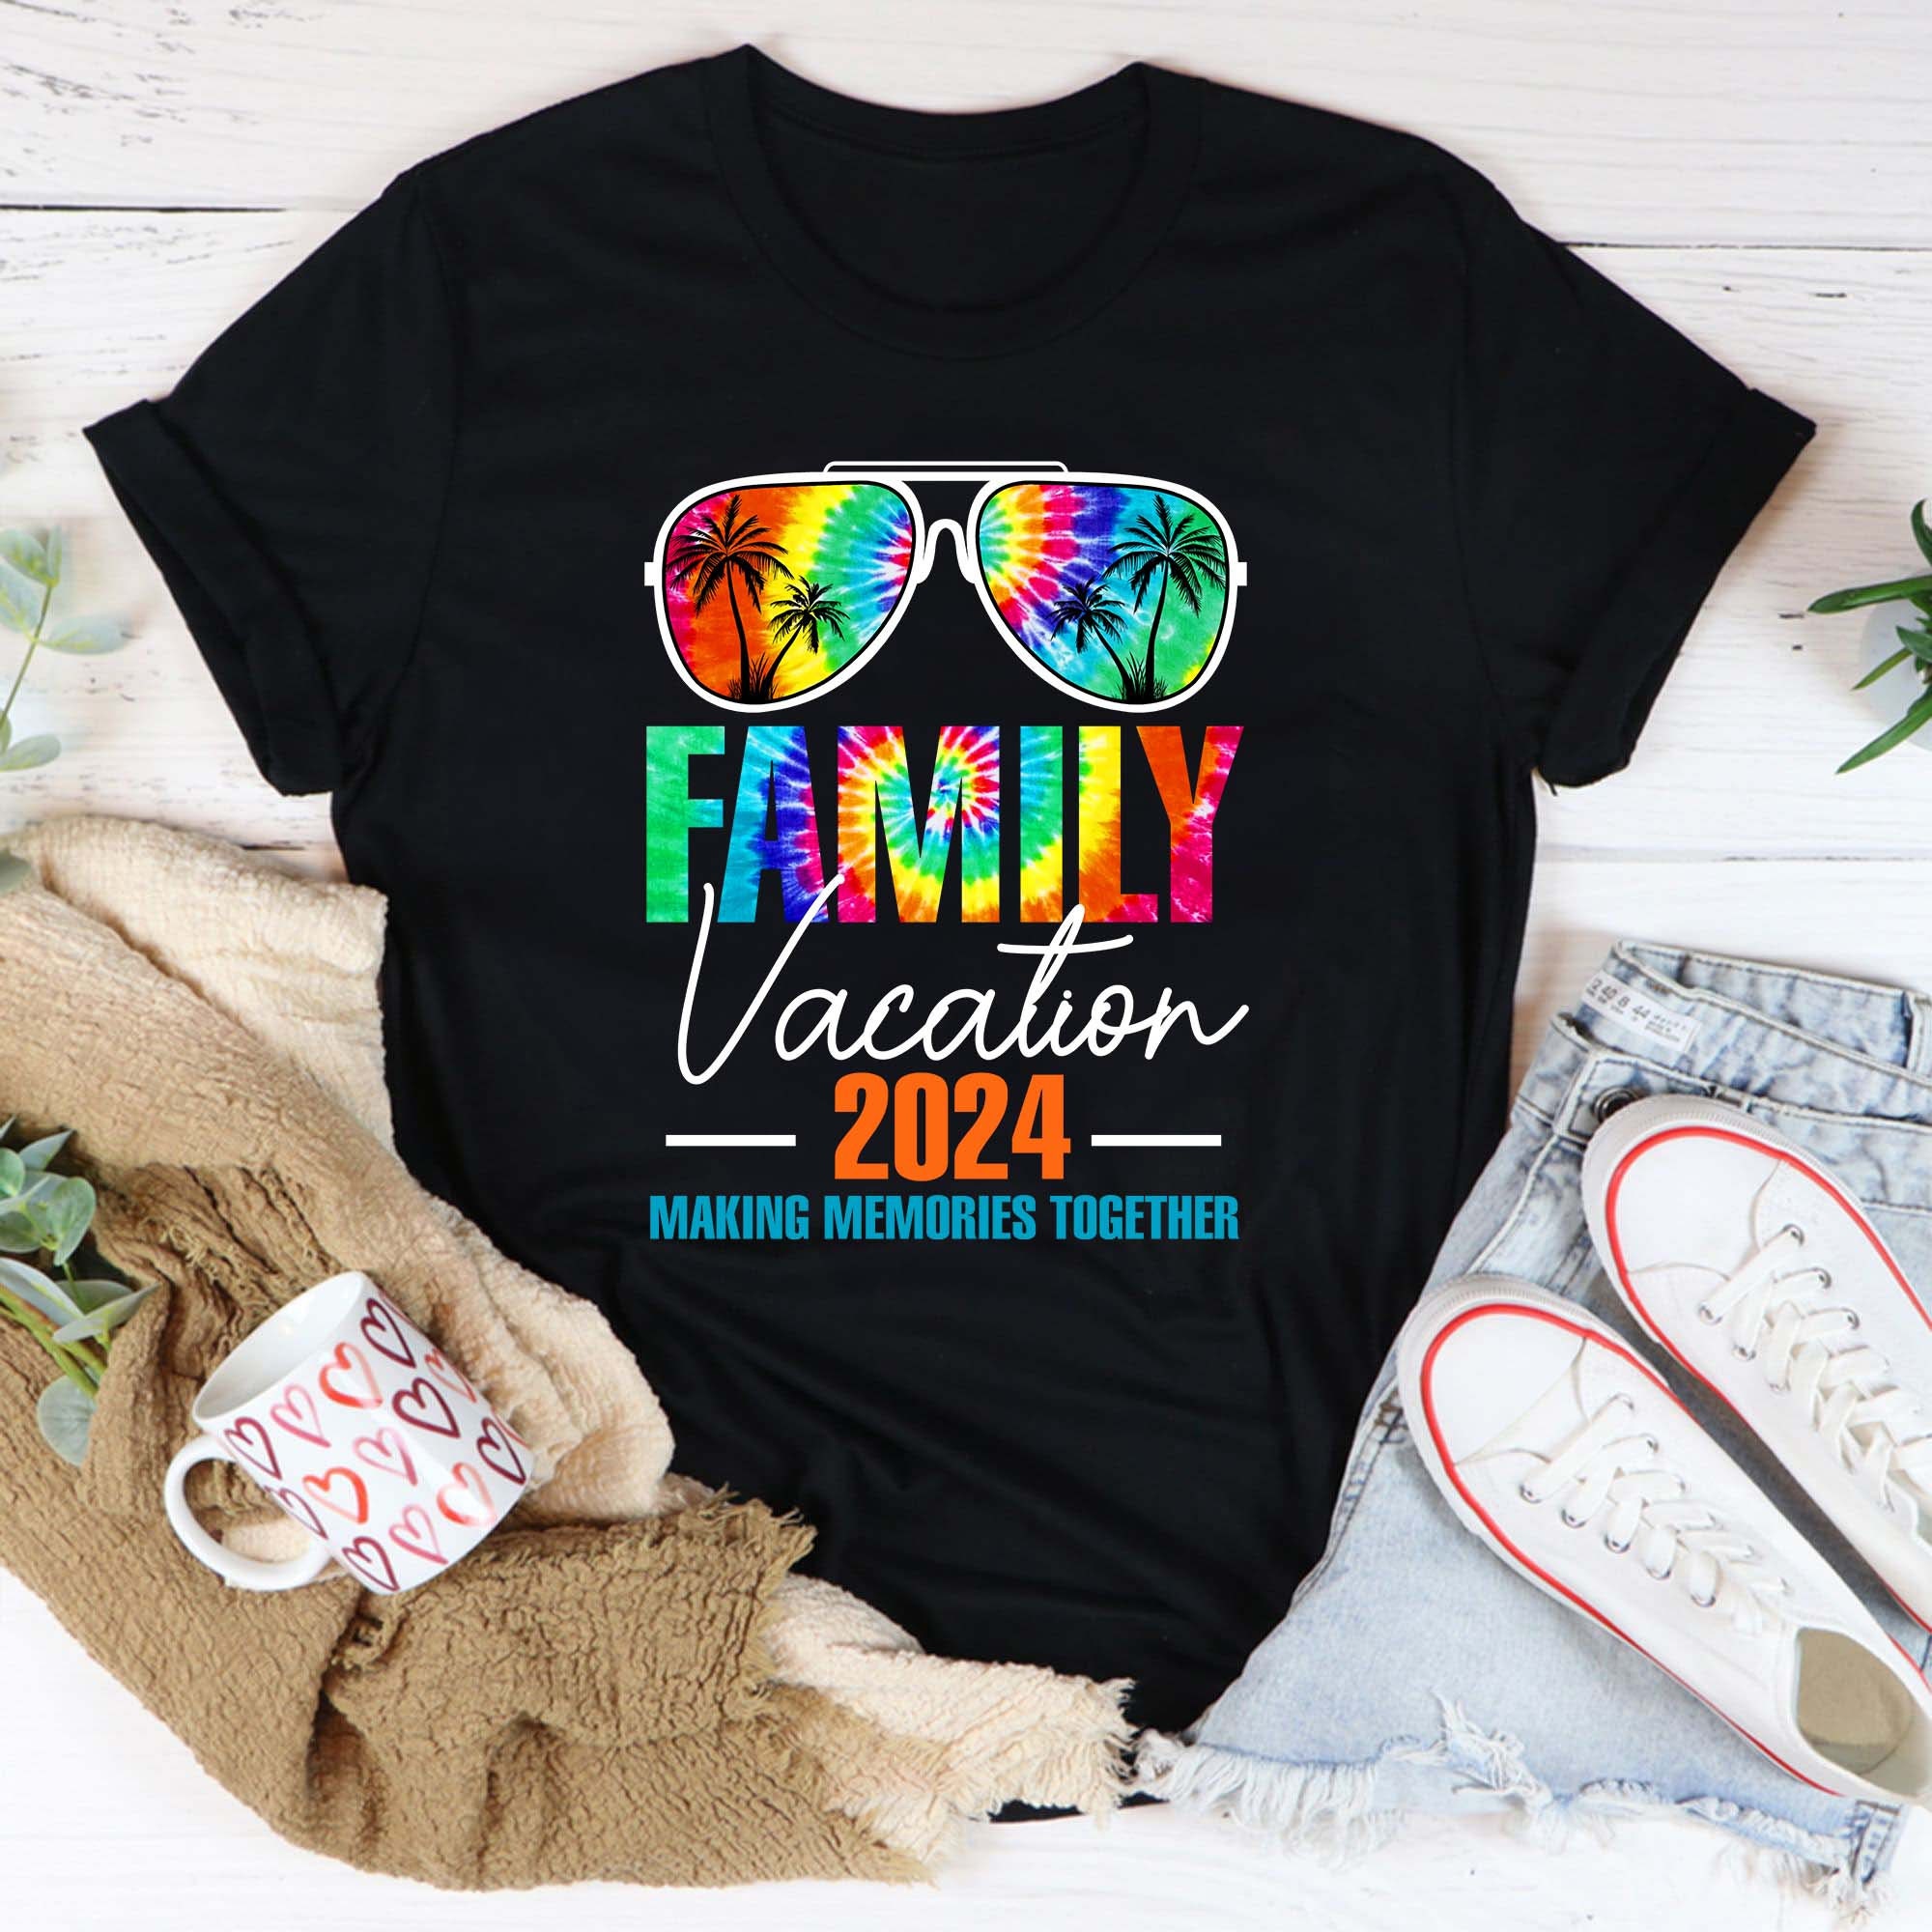 Discover Family Vacation 2024 Making Memories Together Shirt, Family Matching shirt, Family Beach Trip Shirt, Funny Family Trip Tees, Summer 2024